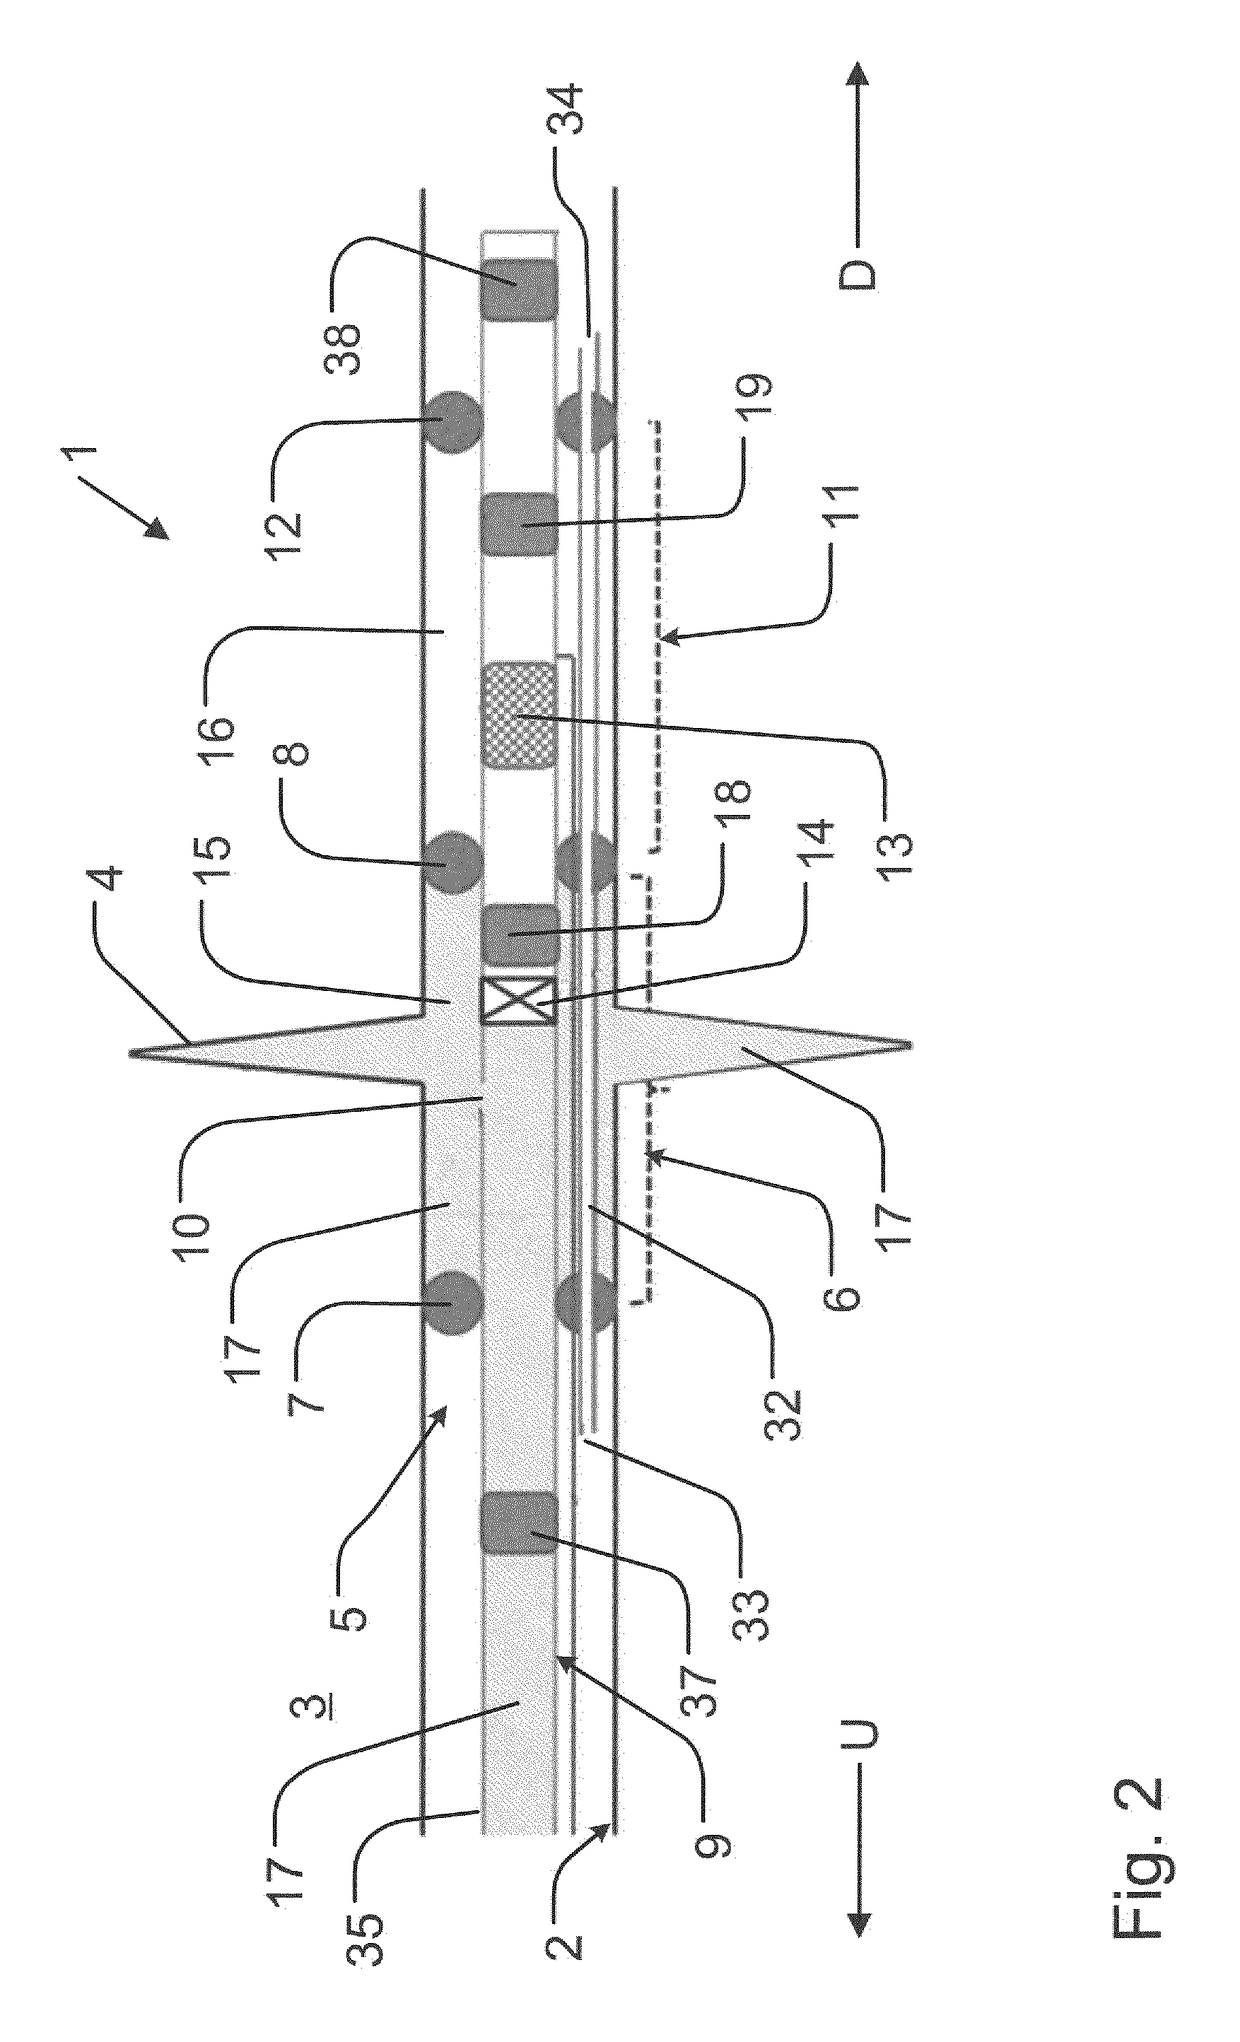 Sealing device and method for sealing fractures or leaks in wall or formation surrounding tube-shaped channel